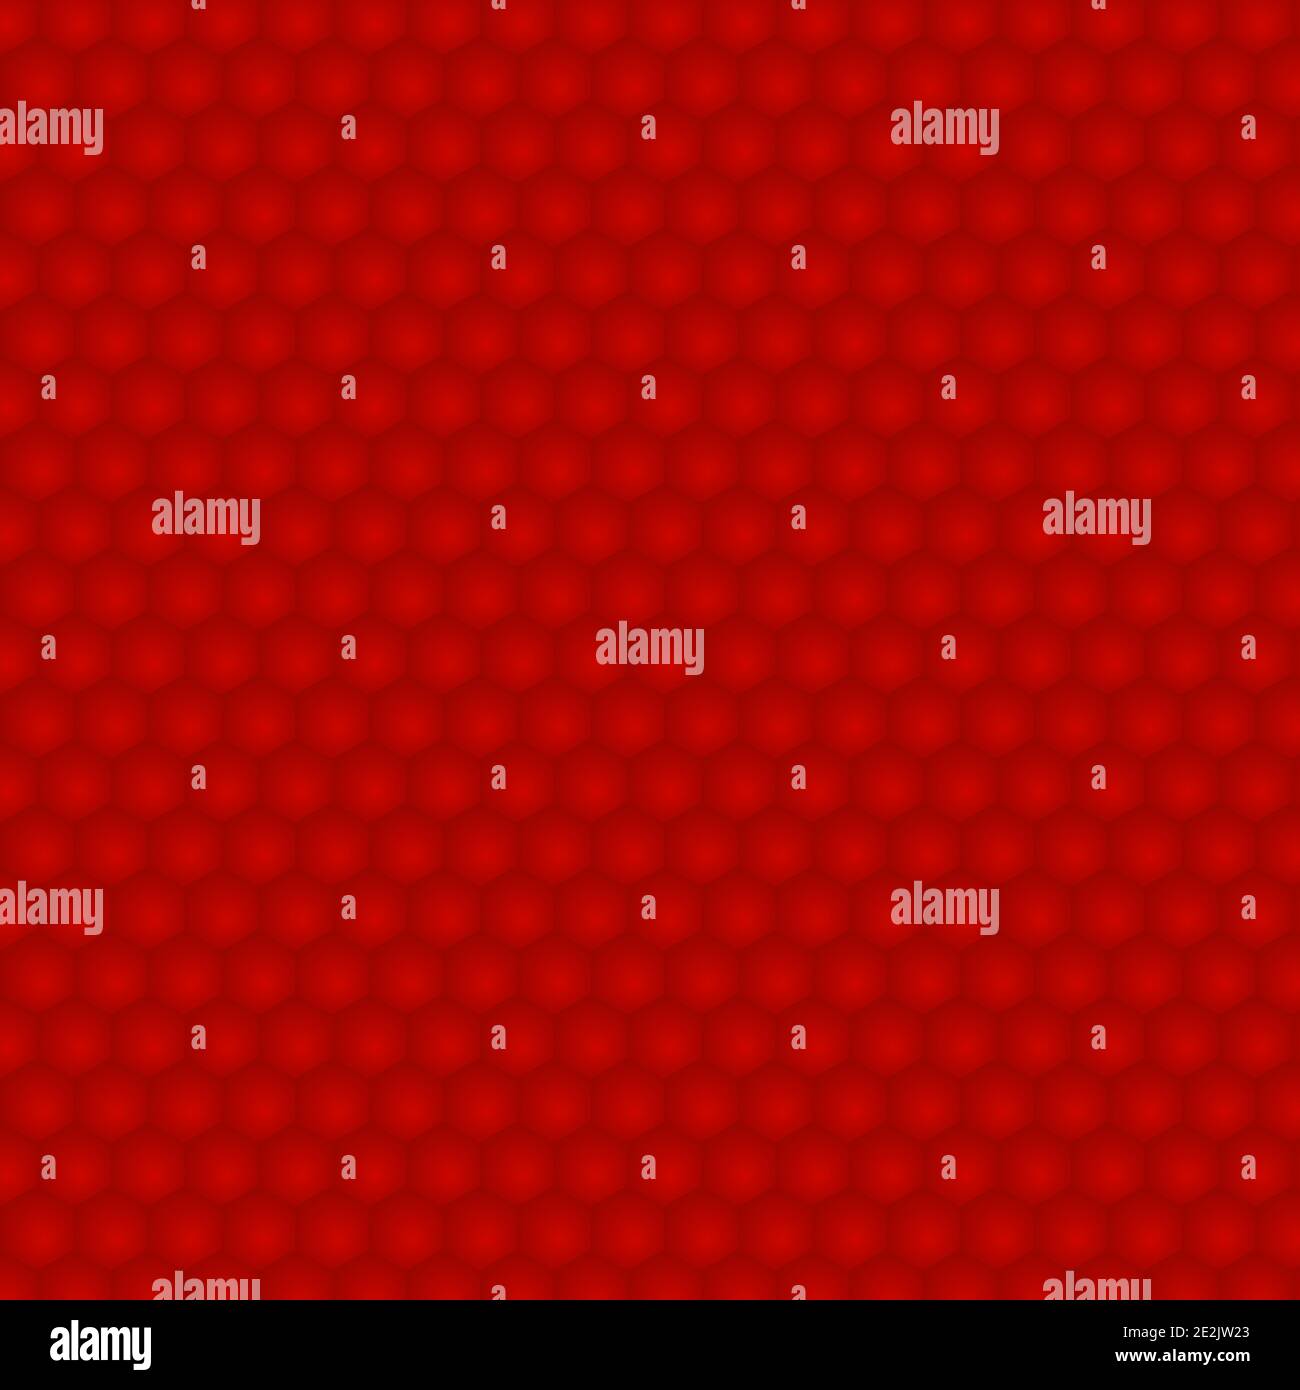 Red Cell Seamless Stock Vector